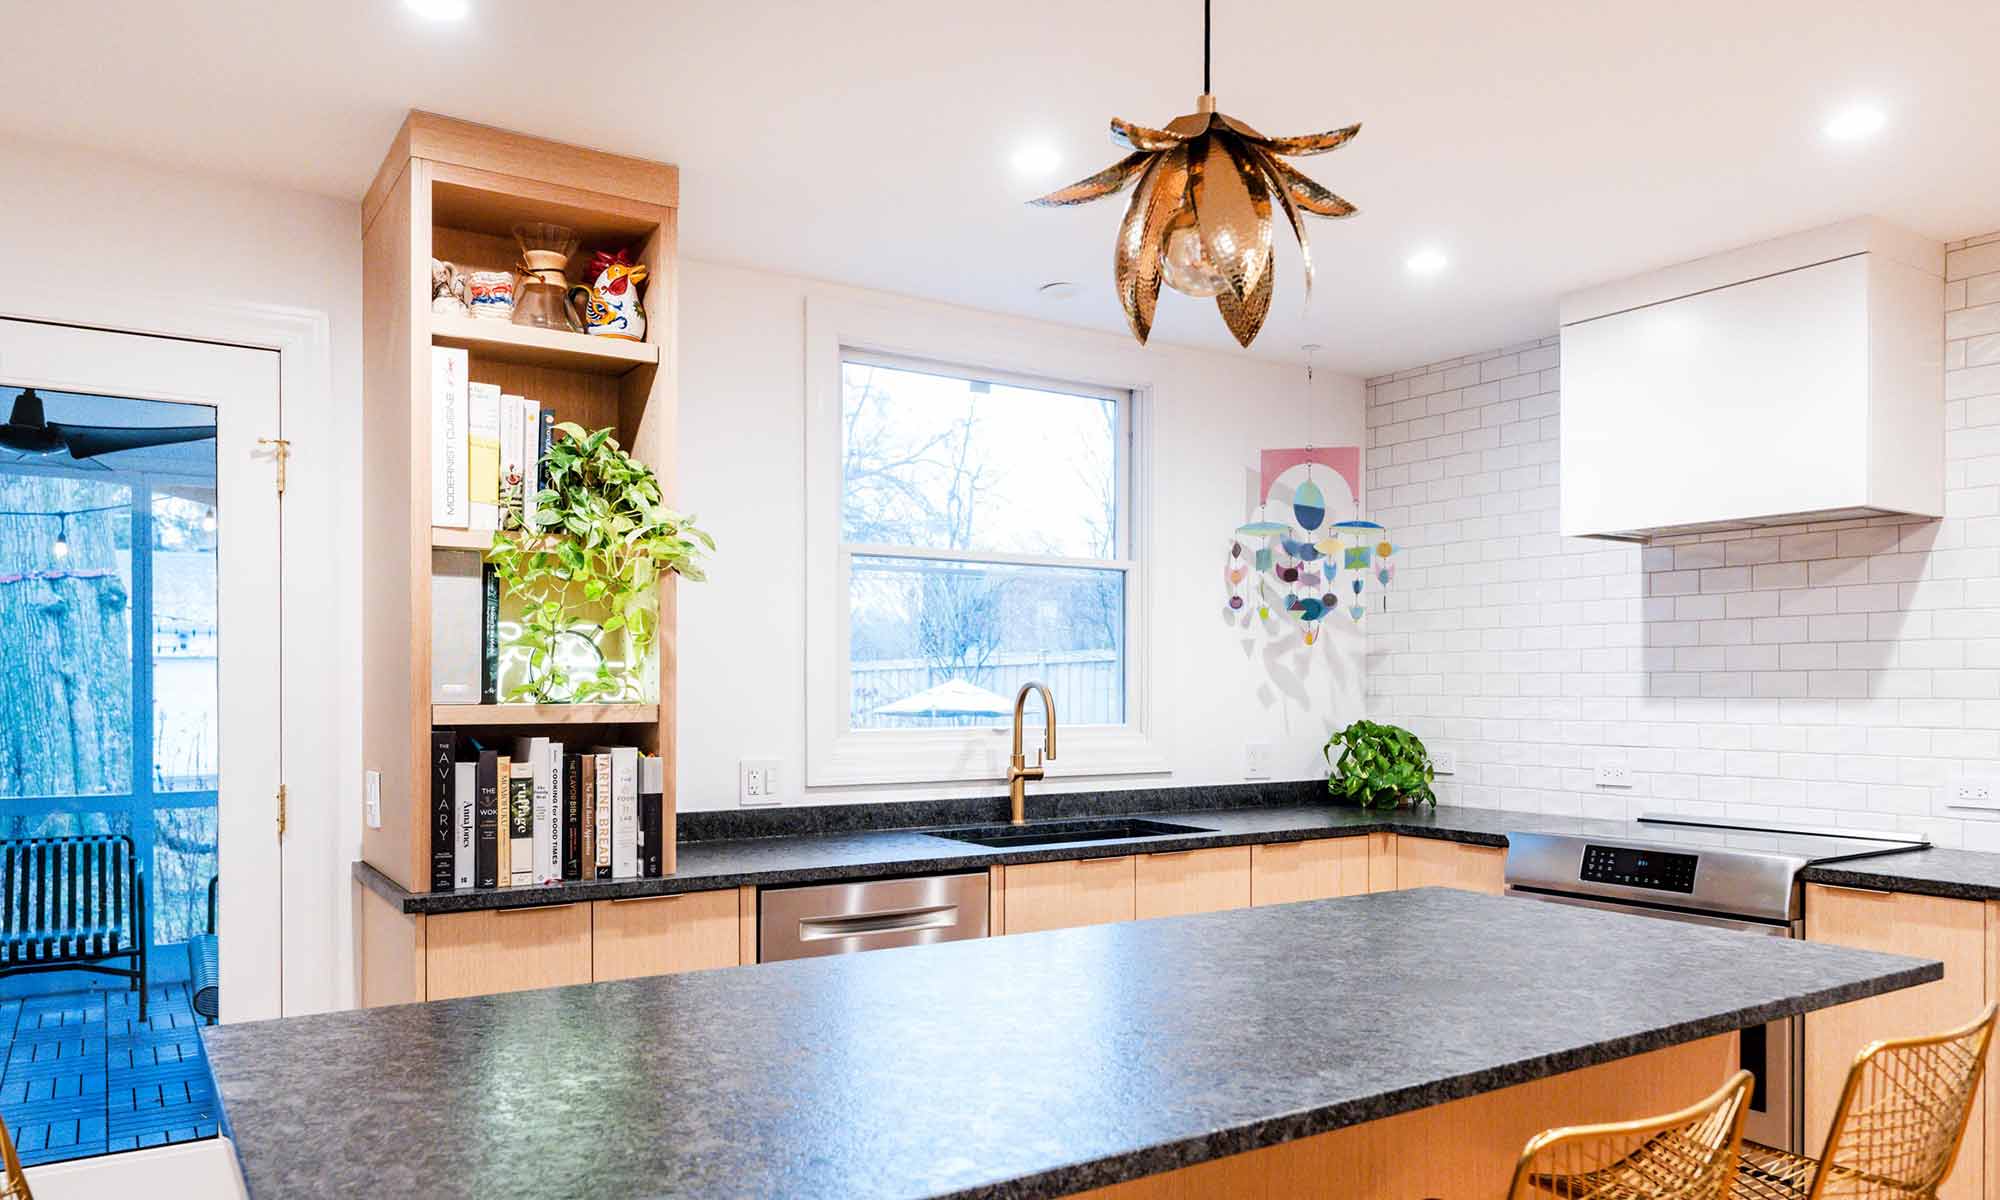 Modern luxury kitchen remodel in Riverside, IL with white oak cabinets and black stone countertops and open shelves with a plant and rondelay mobile hanging from ceiling